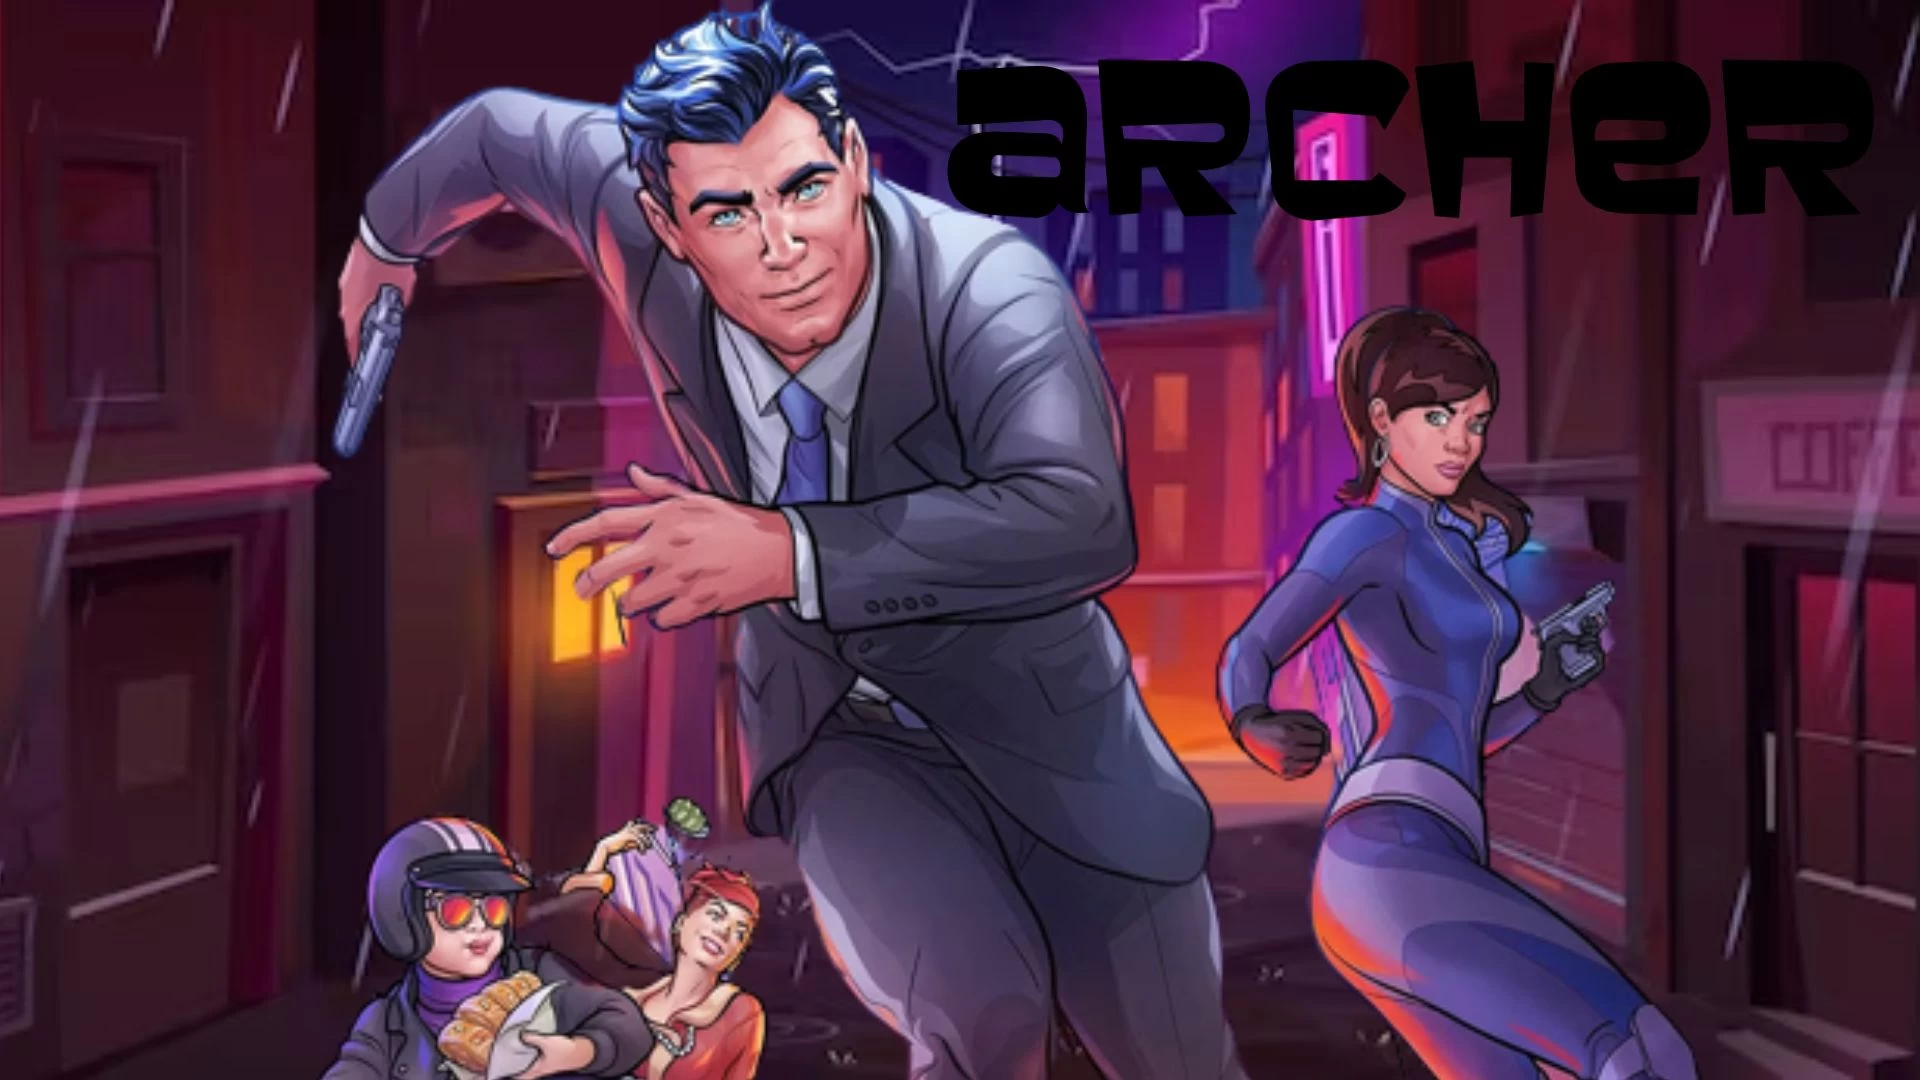 Archer Season 14 Episode 7 Ending Explained, Release Date, Cast, Plot, Where to Watch and More